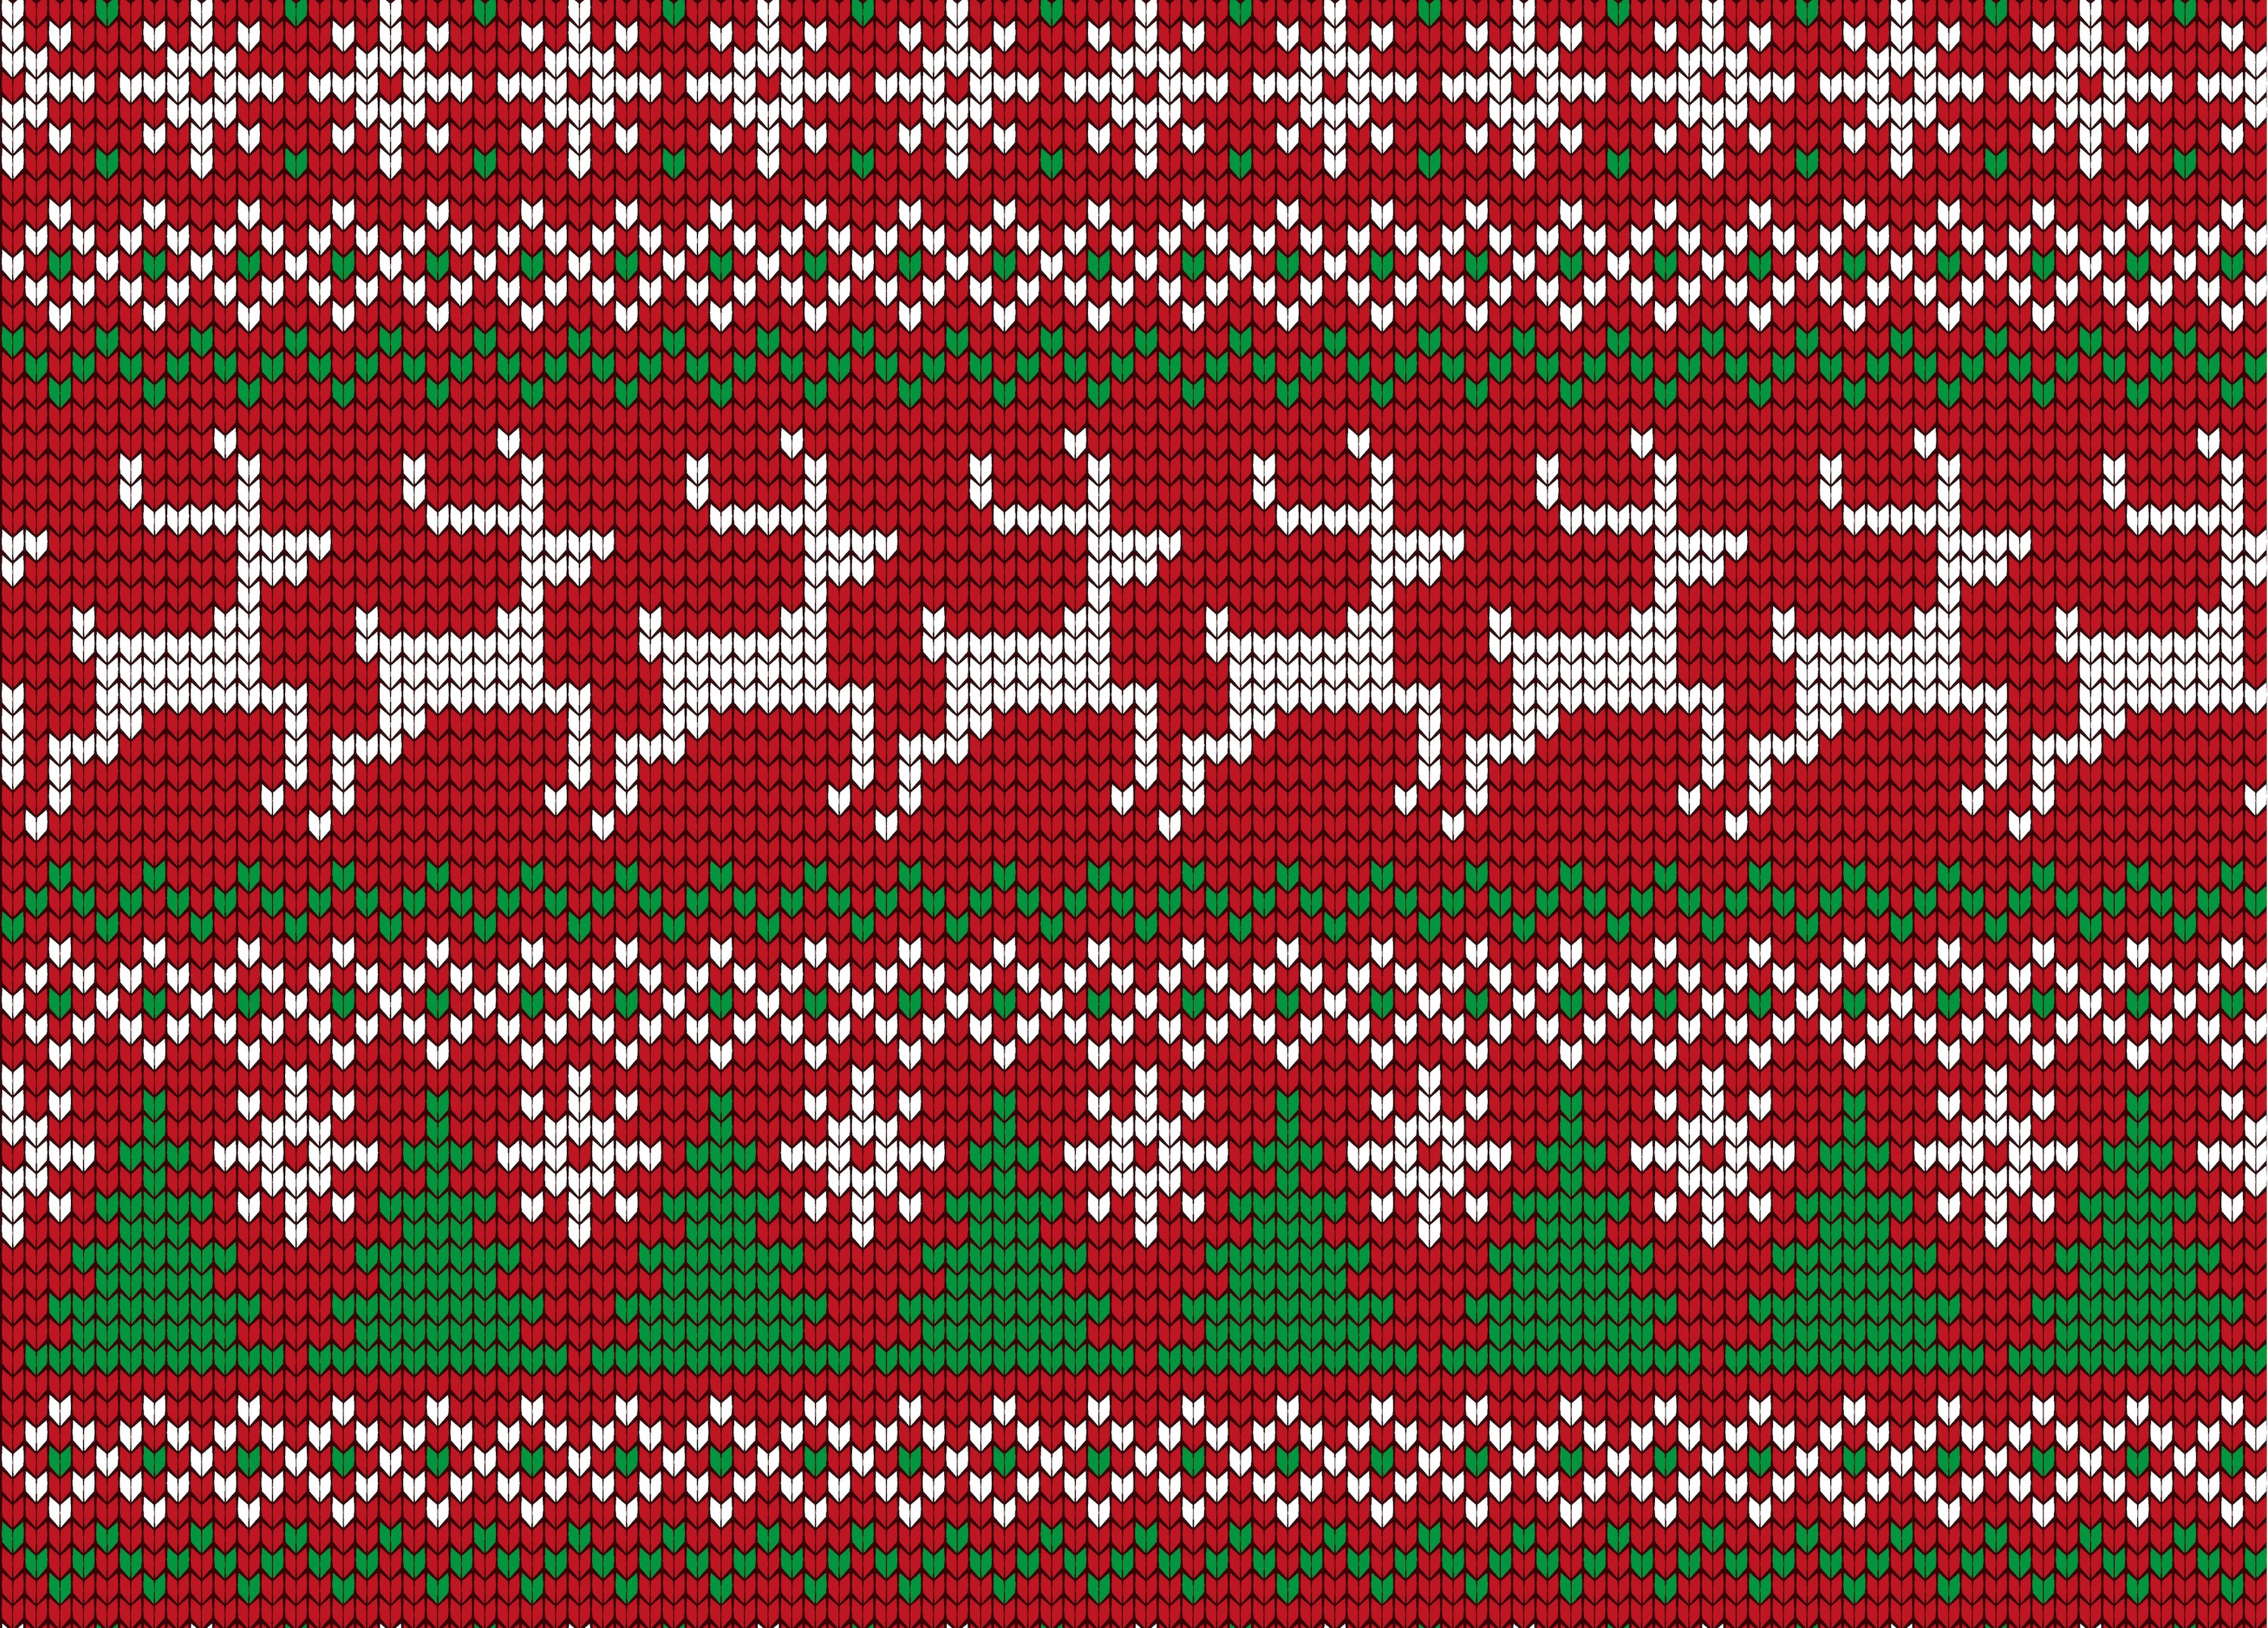 ugly sweater designs.